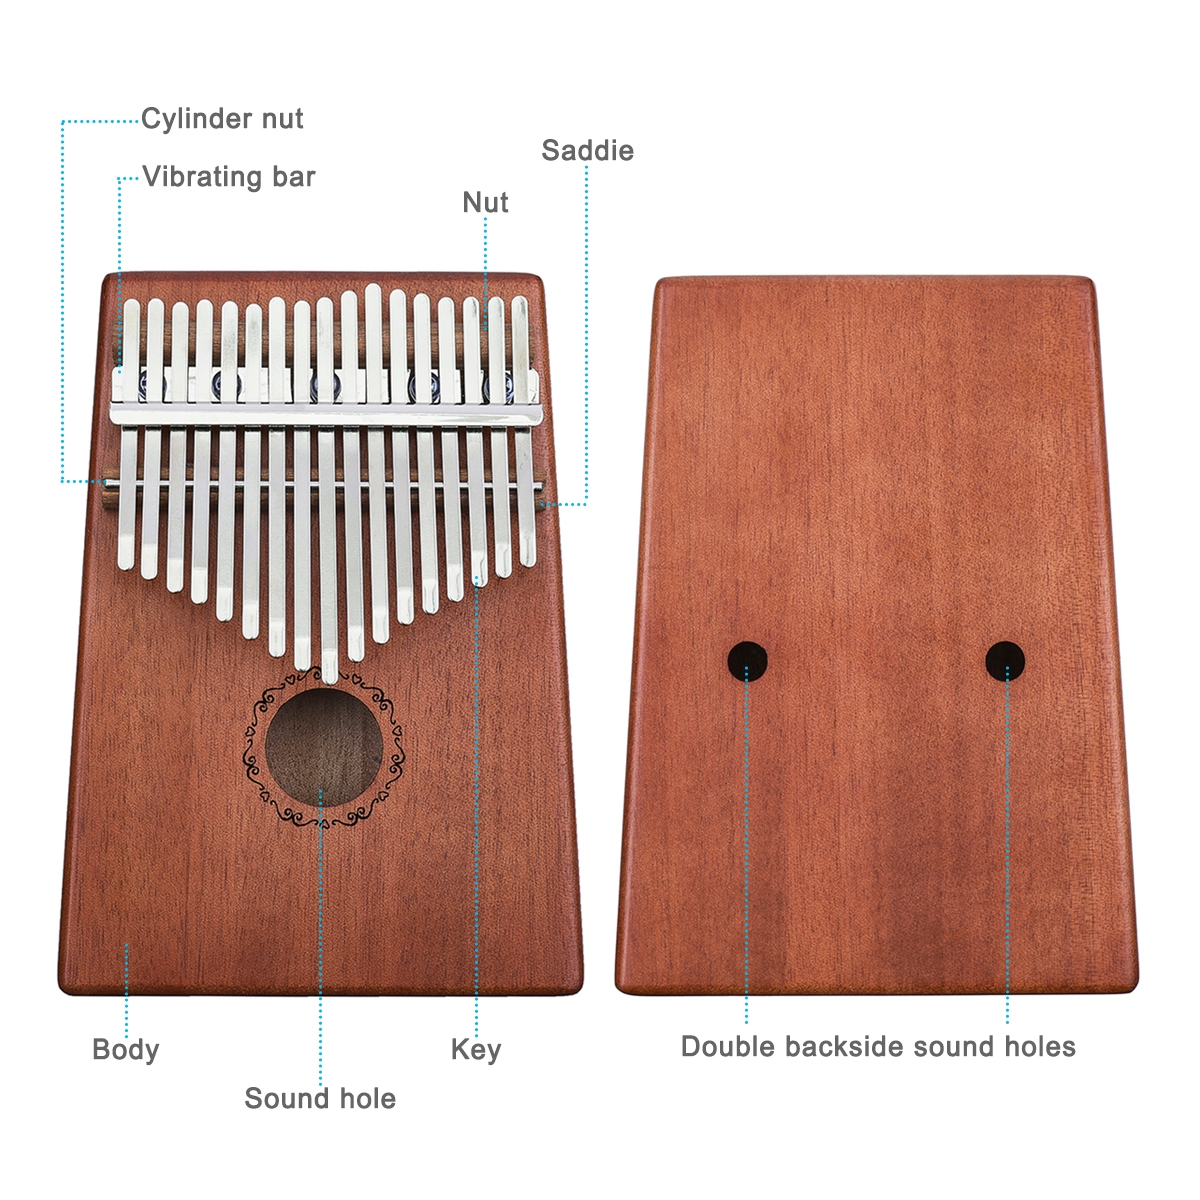 NASUM 17 Keys Kalimbas Thumb Finger Piano for Children Gift Mahogany Body Musical Instrument with Adjusting Hammer and Teaching Material